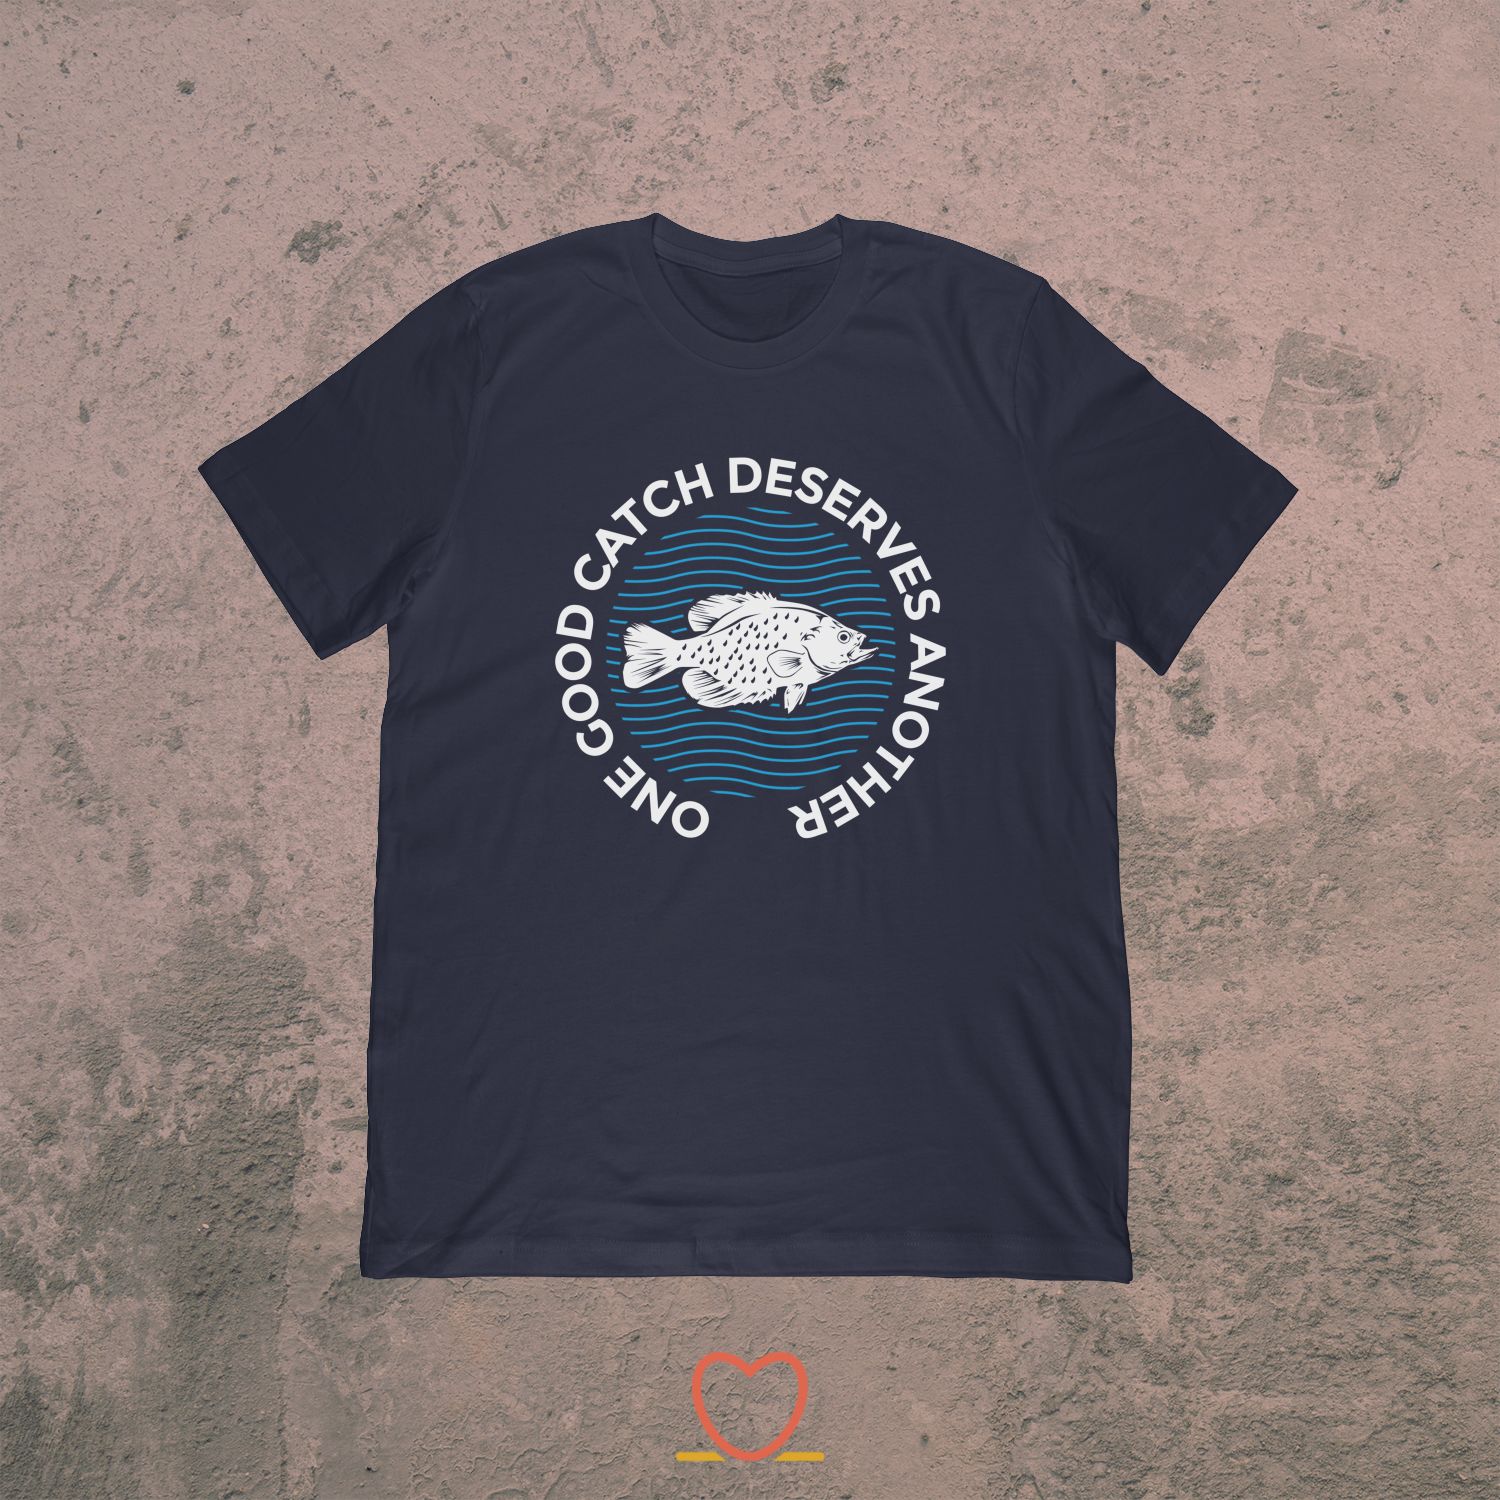 One Good Catch Deserves Another – Funny Crappie Fishing Tee